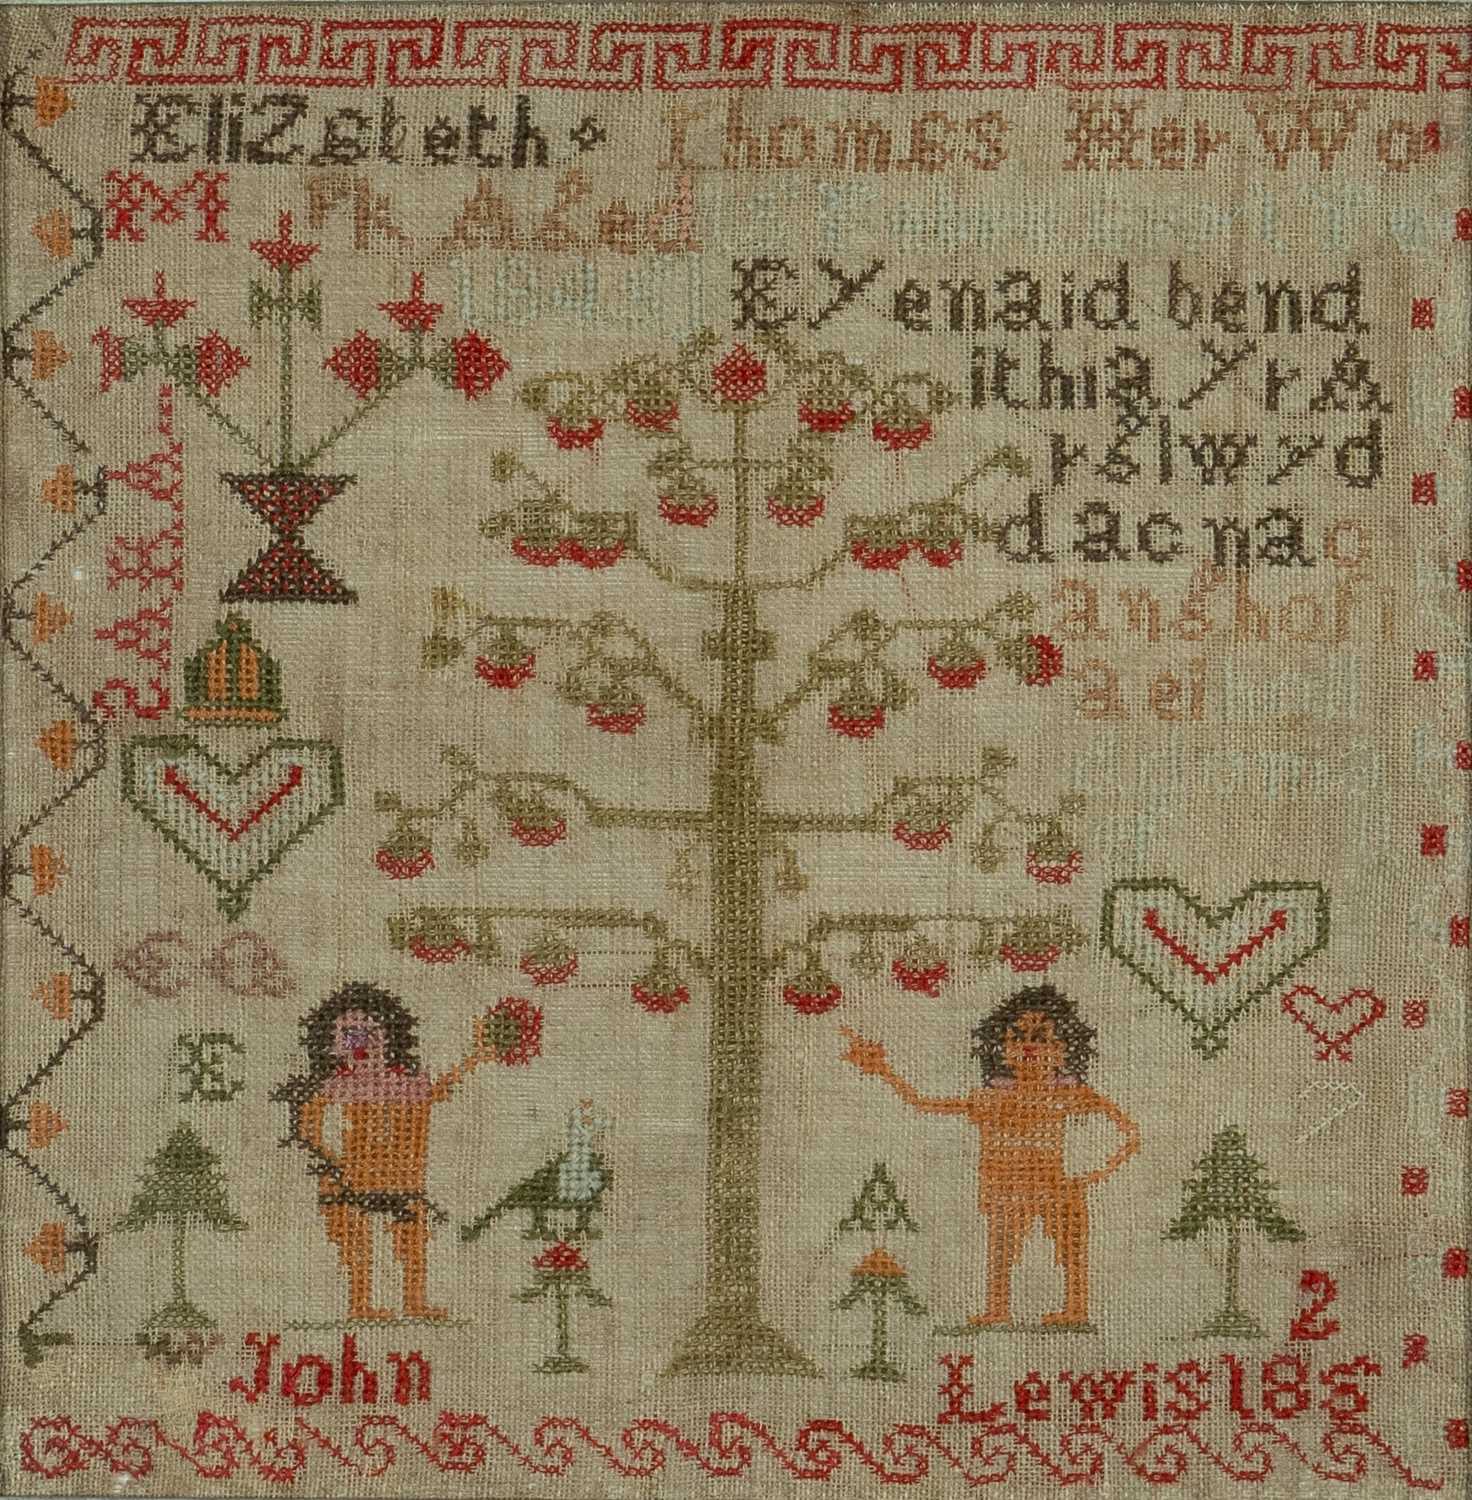 WELSH & ENGLISH LANGUAGE WOOLWORK SAMPLER showing Adam and Eve flanking the apple tree, above '